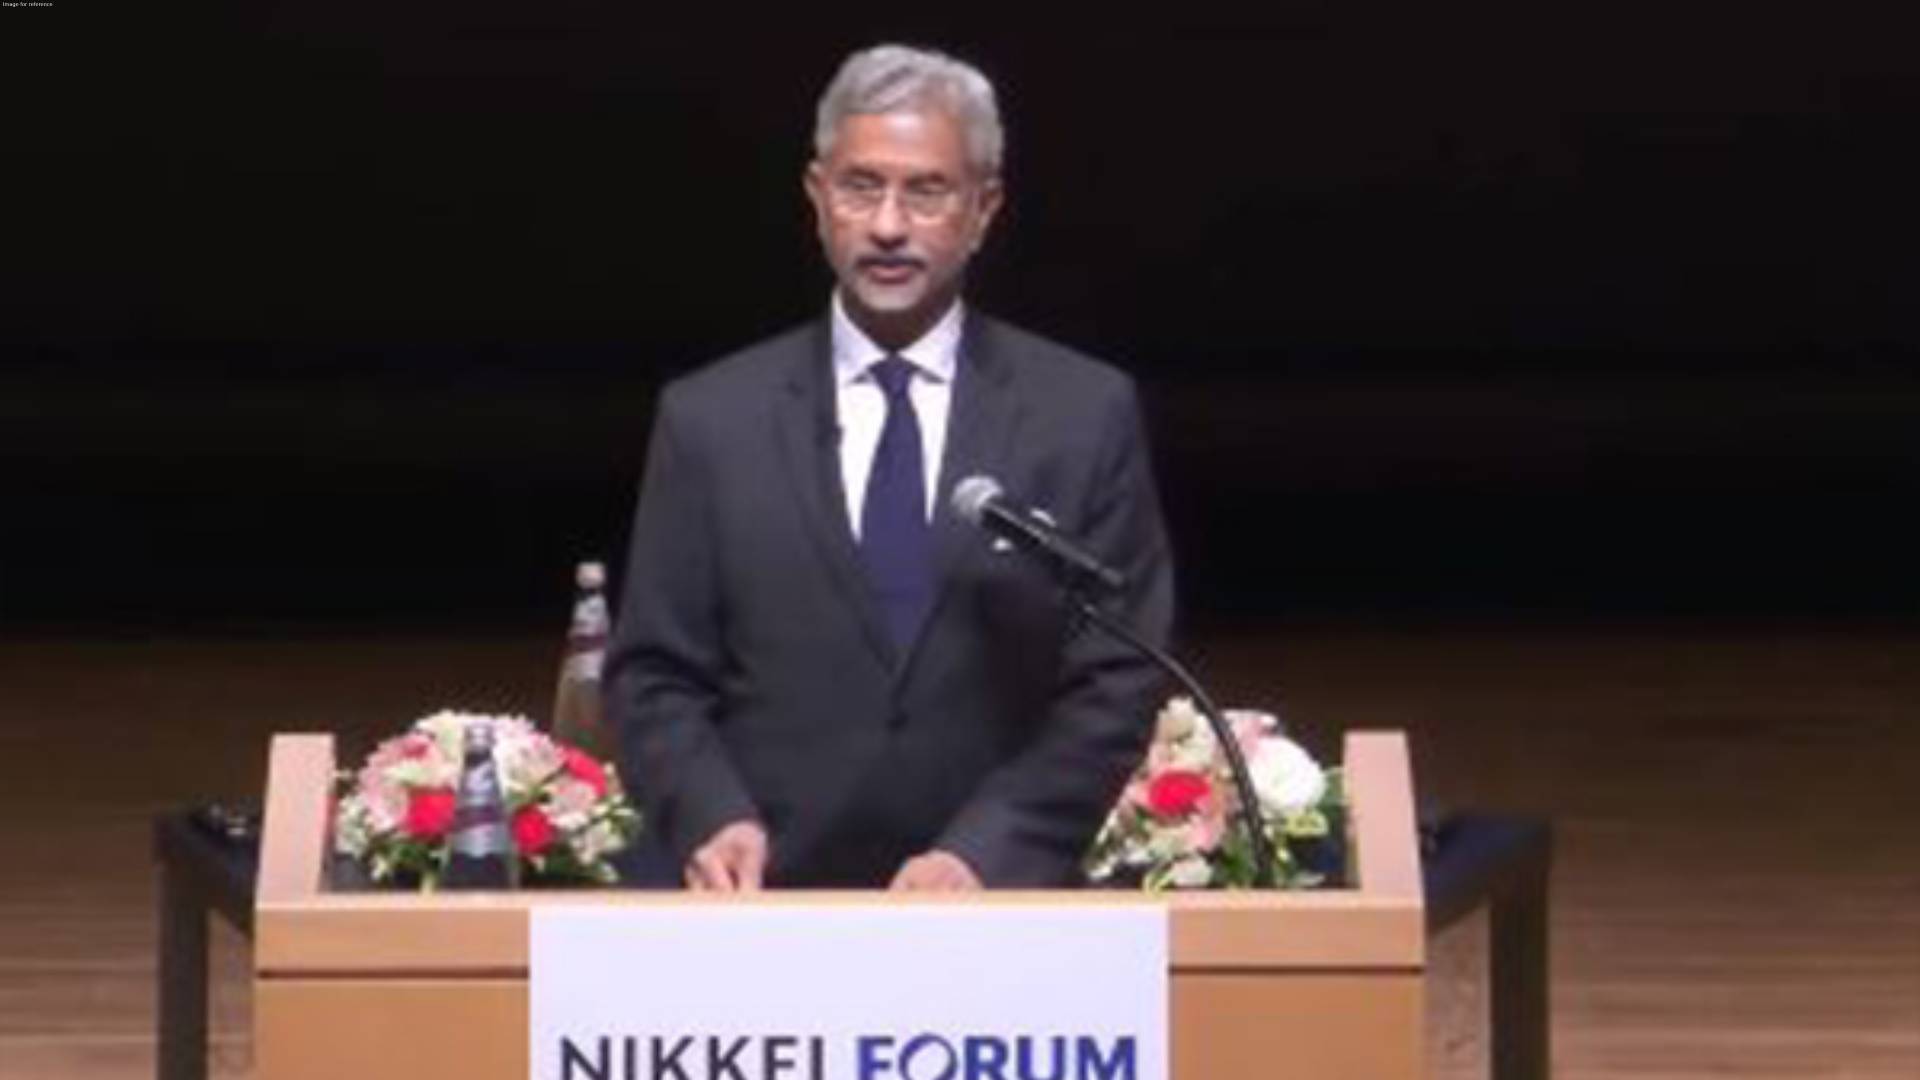 If some of biggest resource providers for UN are kept out, it's not good for organization: Jaishankar